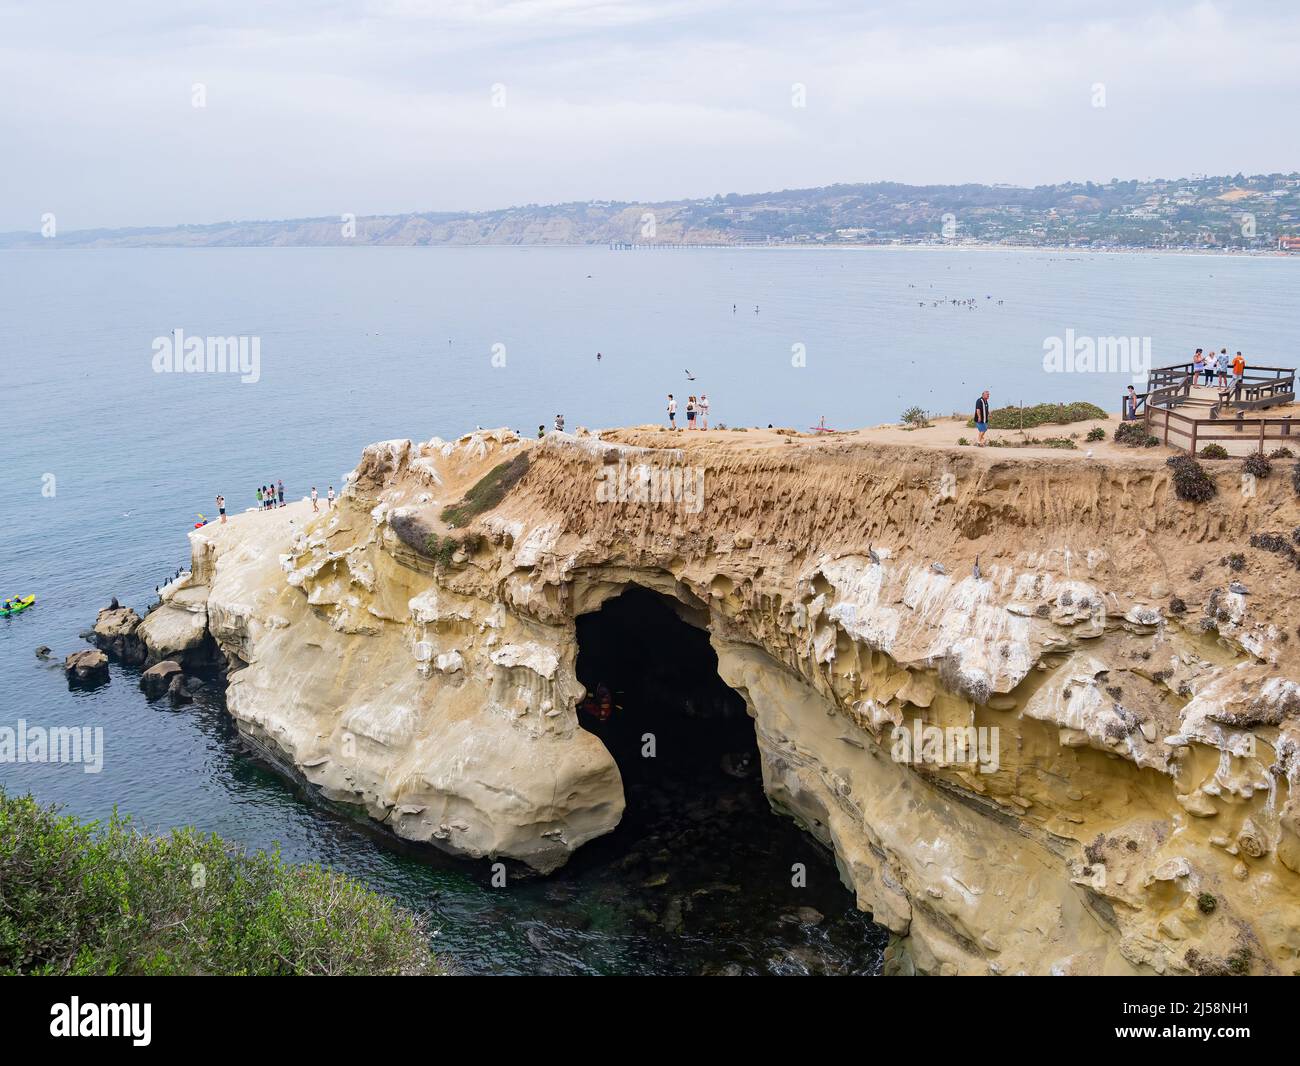 Overcast view of the famous La Jolla Cove at San Diego, California Stock Photo